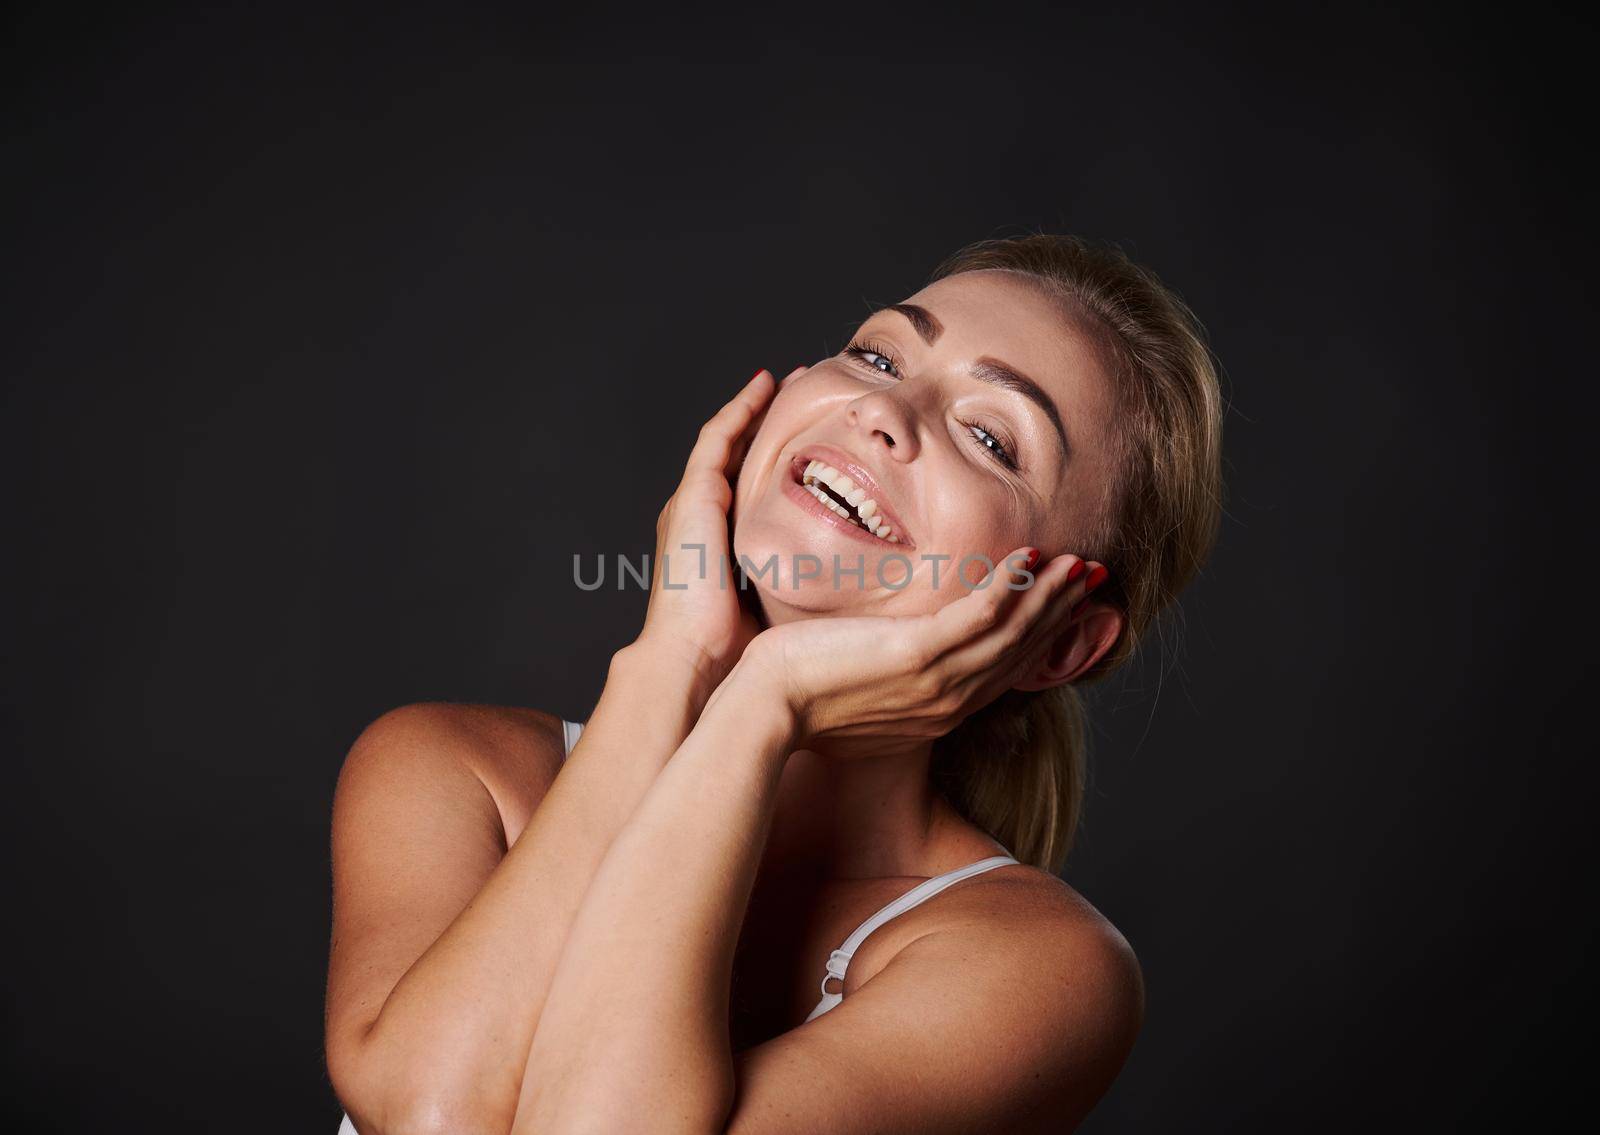 Attractive European middle aged woman with fresh glowing skin smiles with beautiful toothy smile, isolated over black background. Anti-aging concept, smoothing, rejuvenating beauty treatment